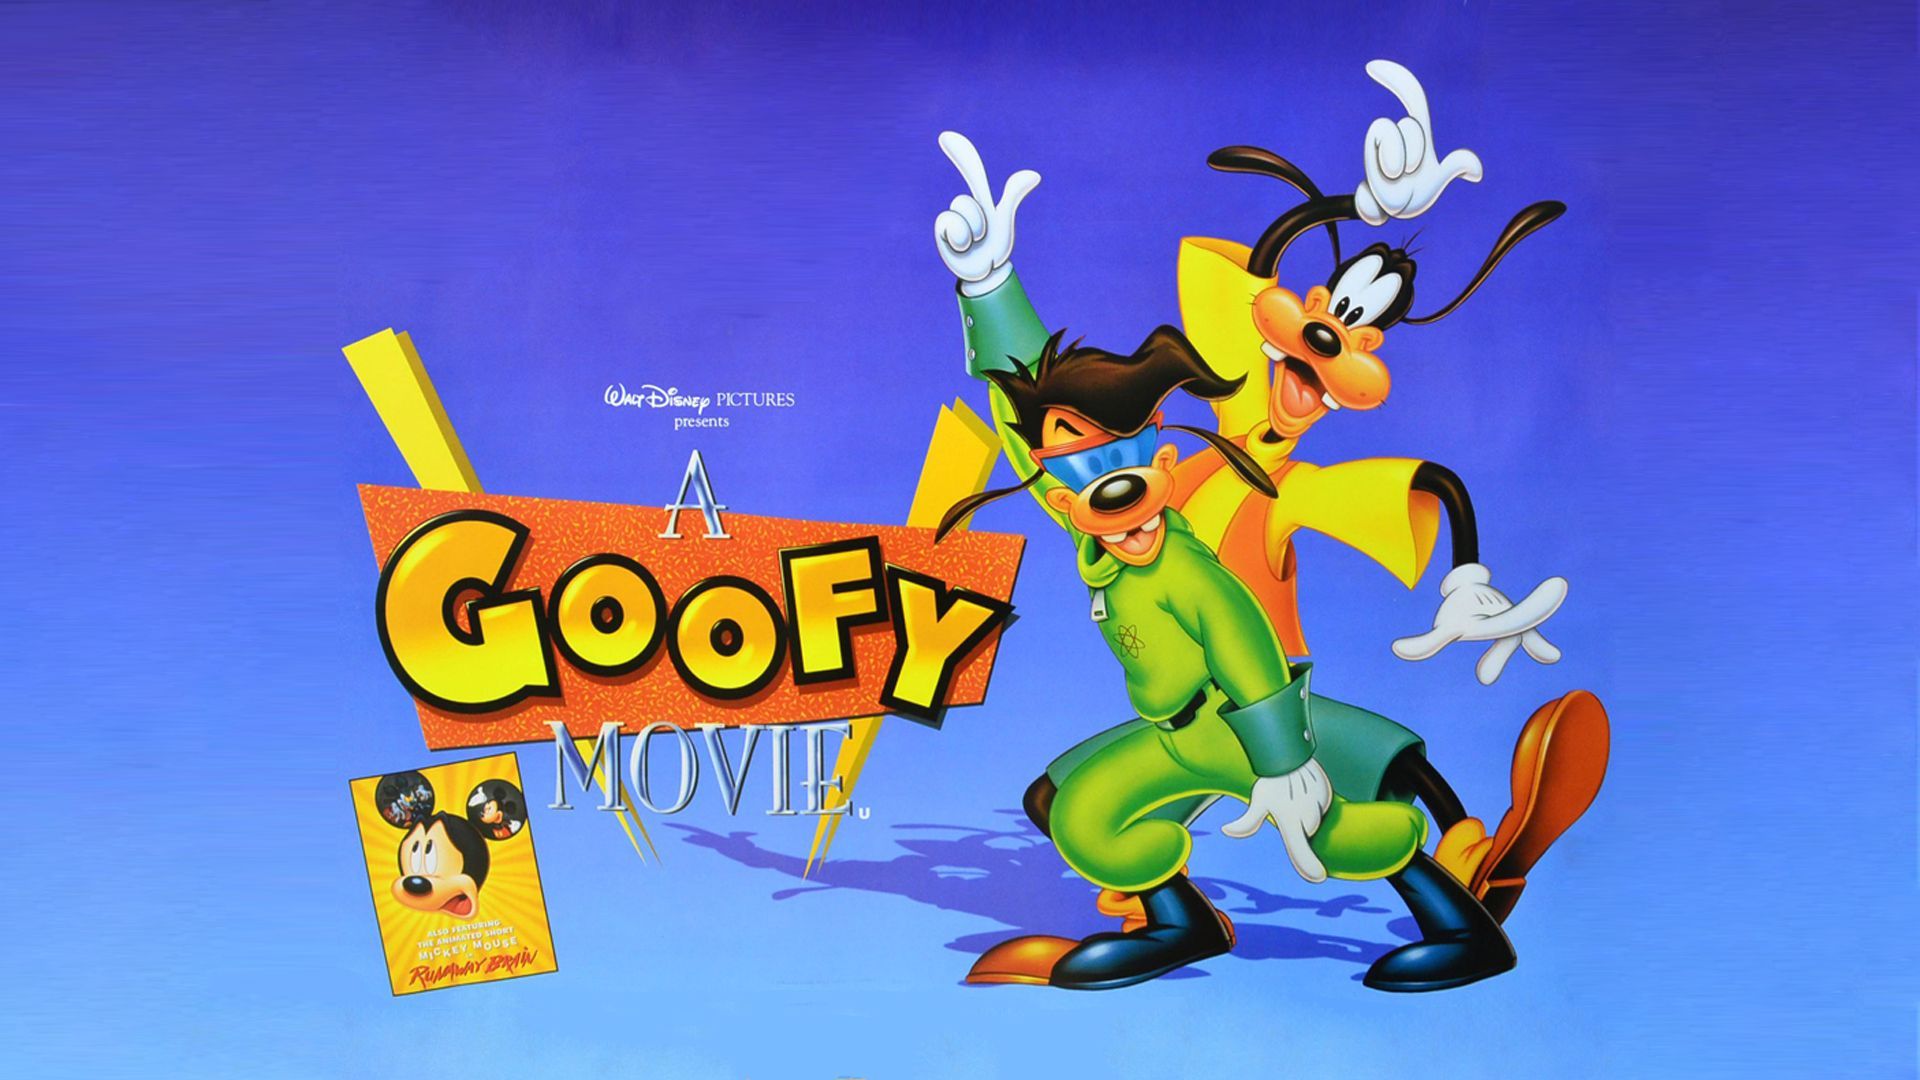 A Goofy Movie Wallpapers.